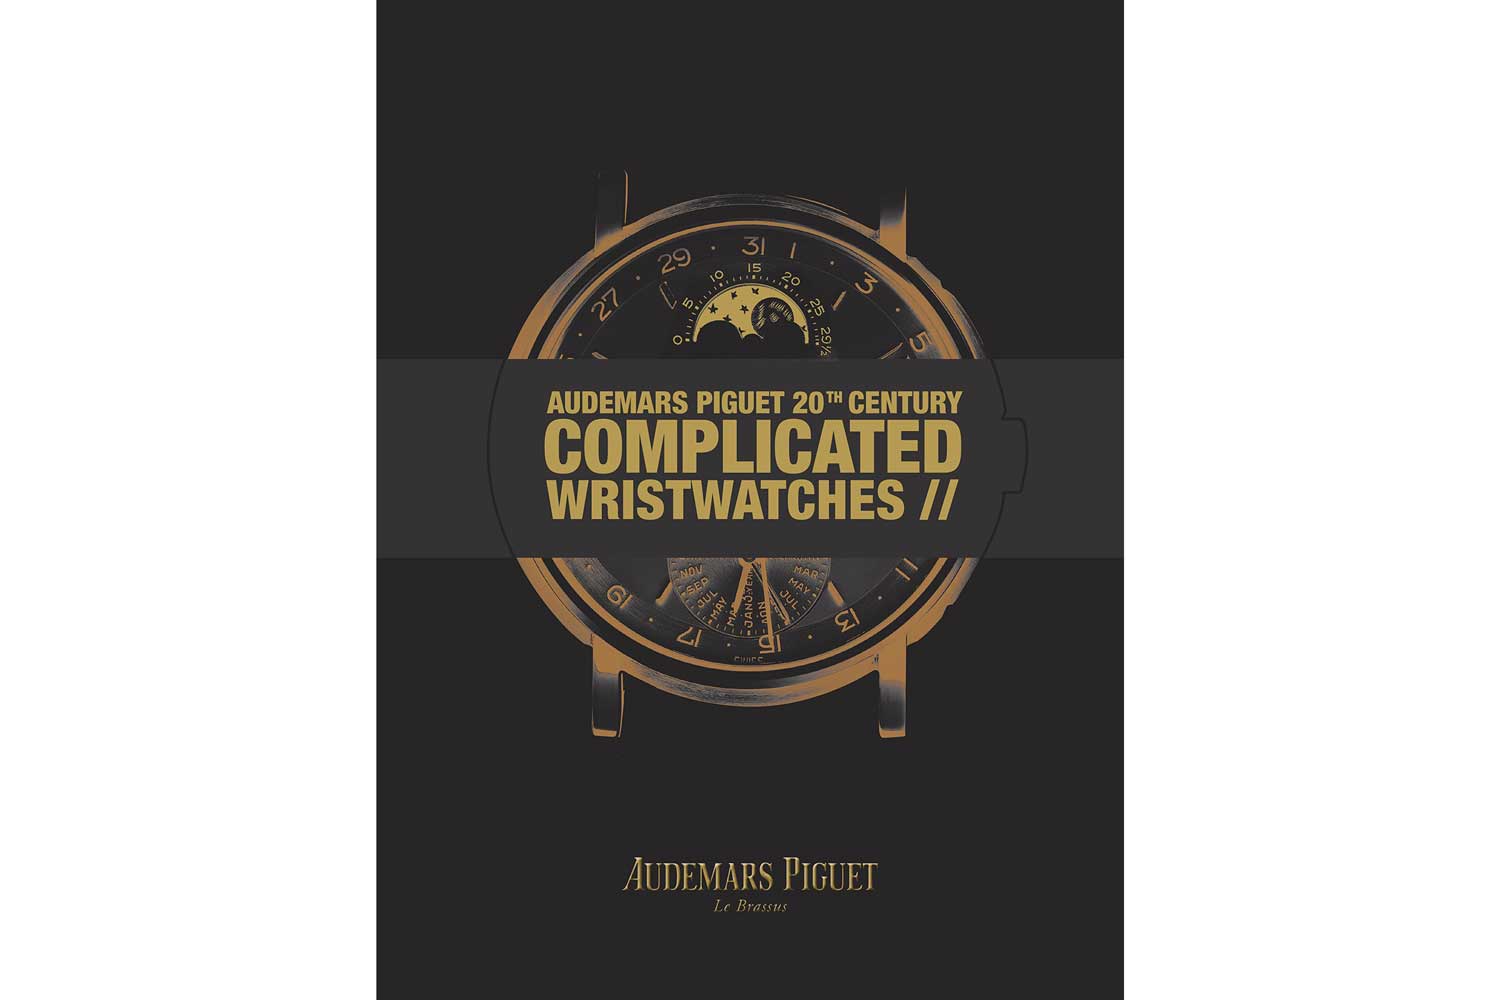 Cover of the
Audemars Piguet 20th Century Complicated Wristwatches, collective work by Audemars Piguet